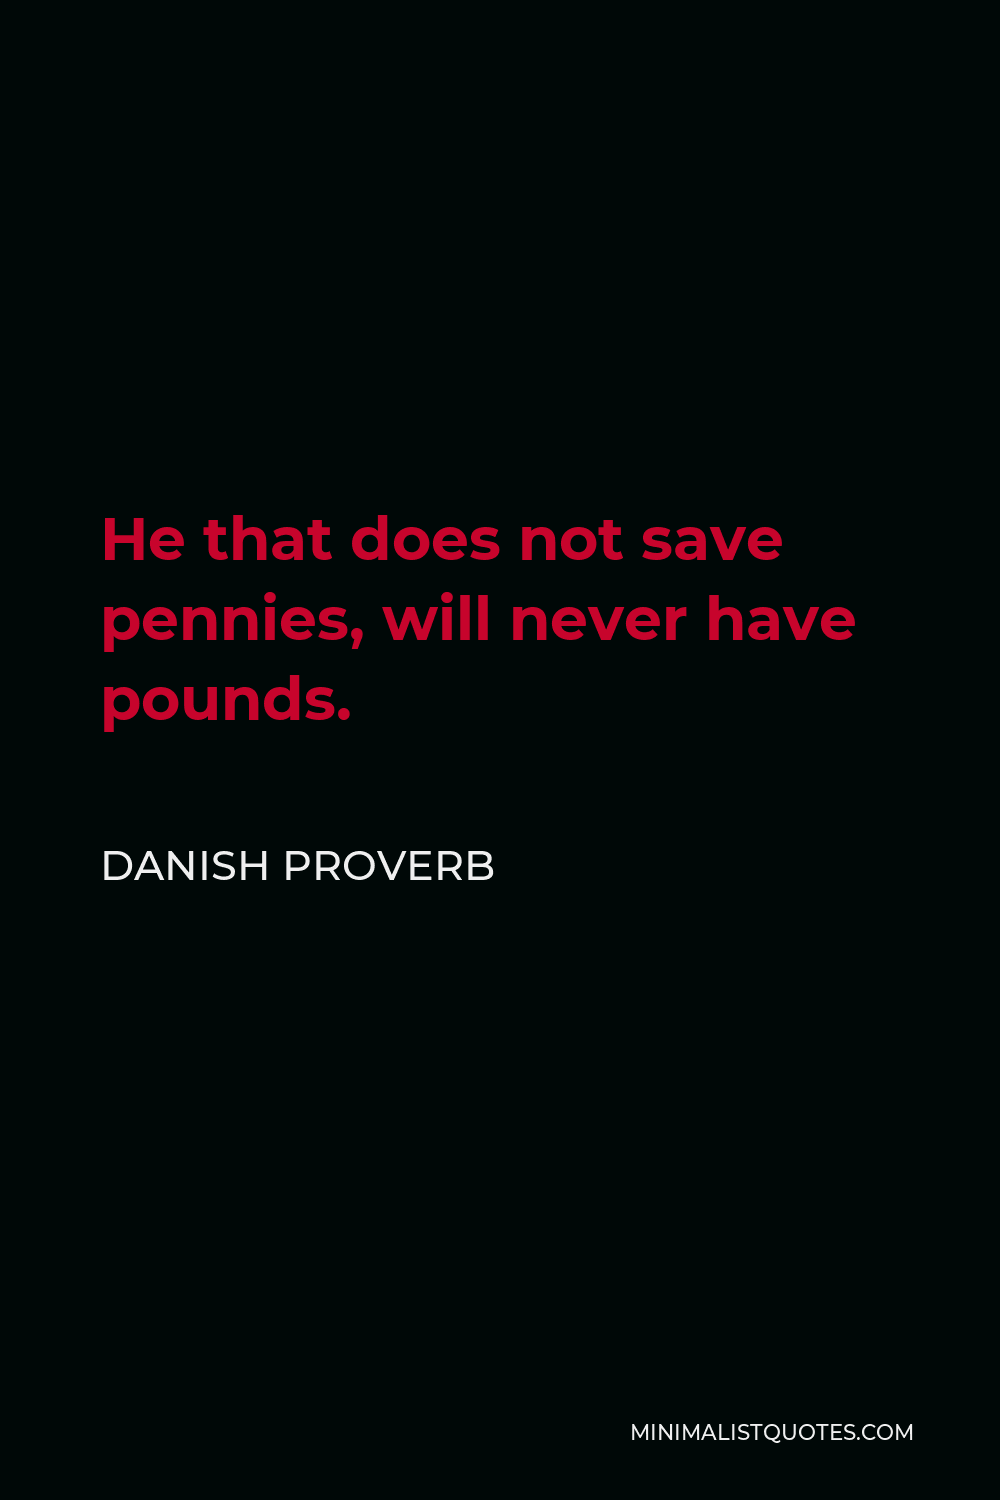 Danish Proverb Quote - He that does not save pennies, will never have pounds.